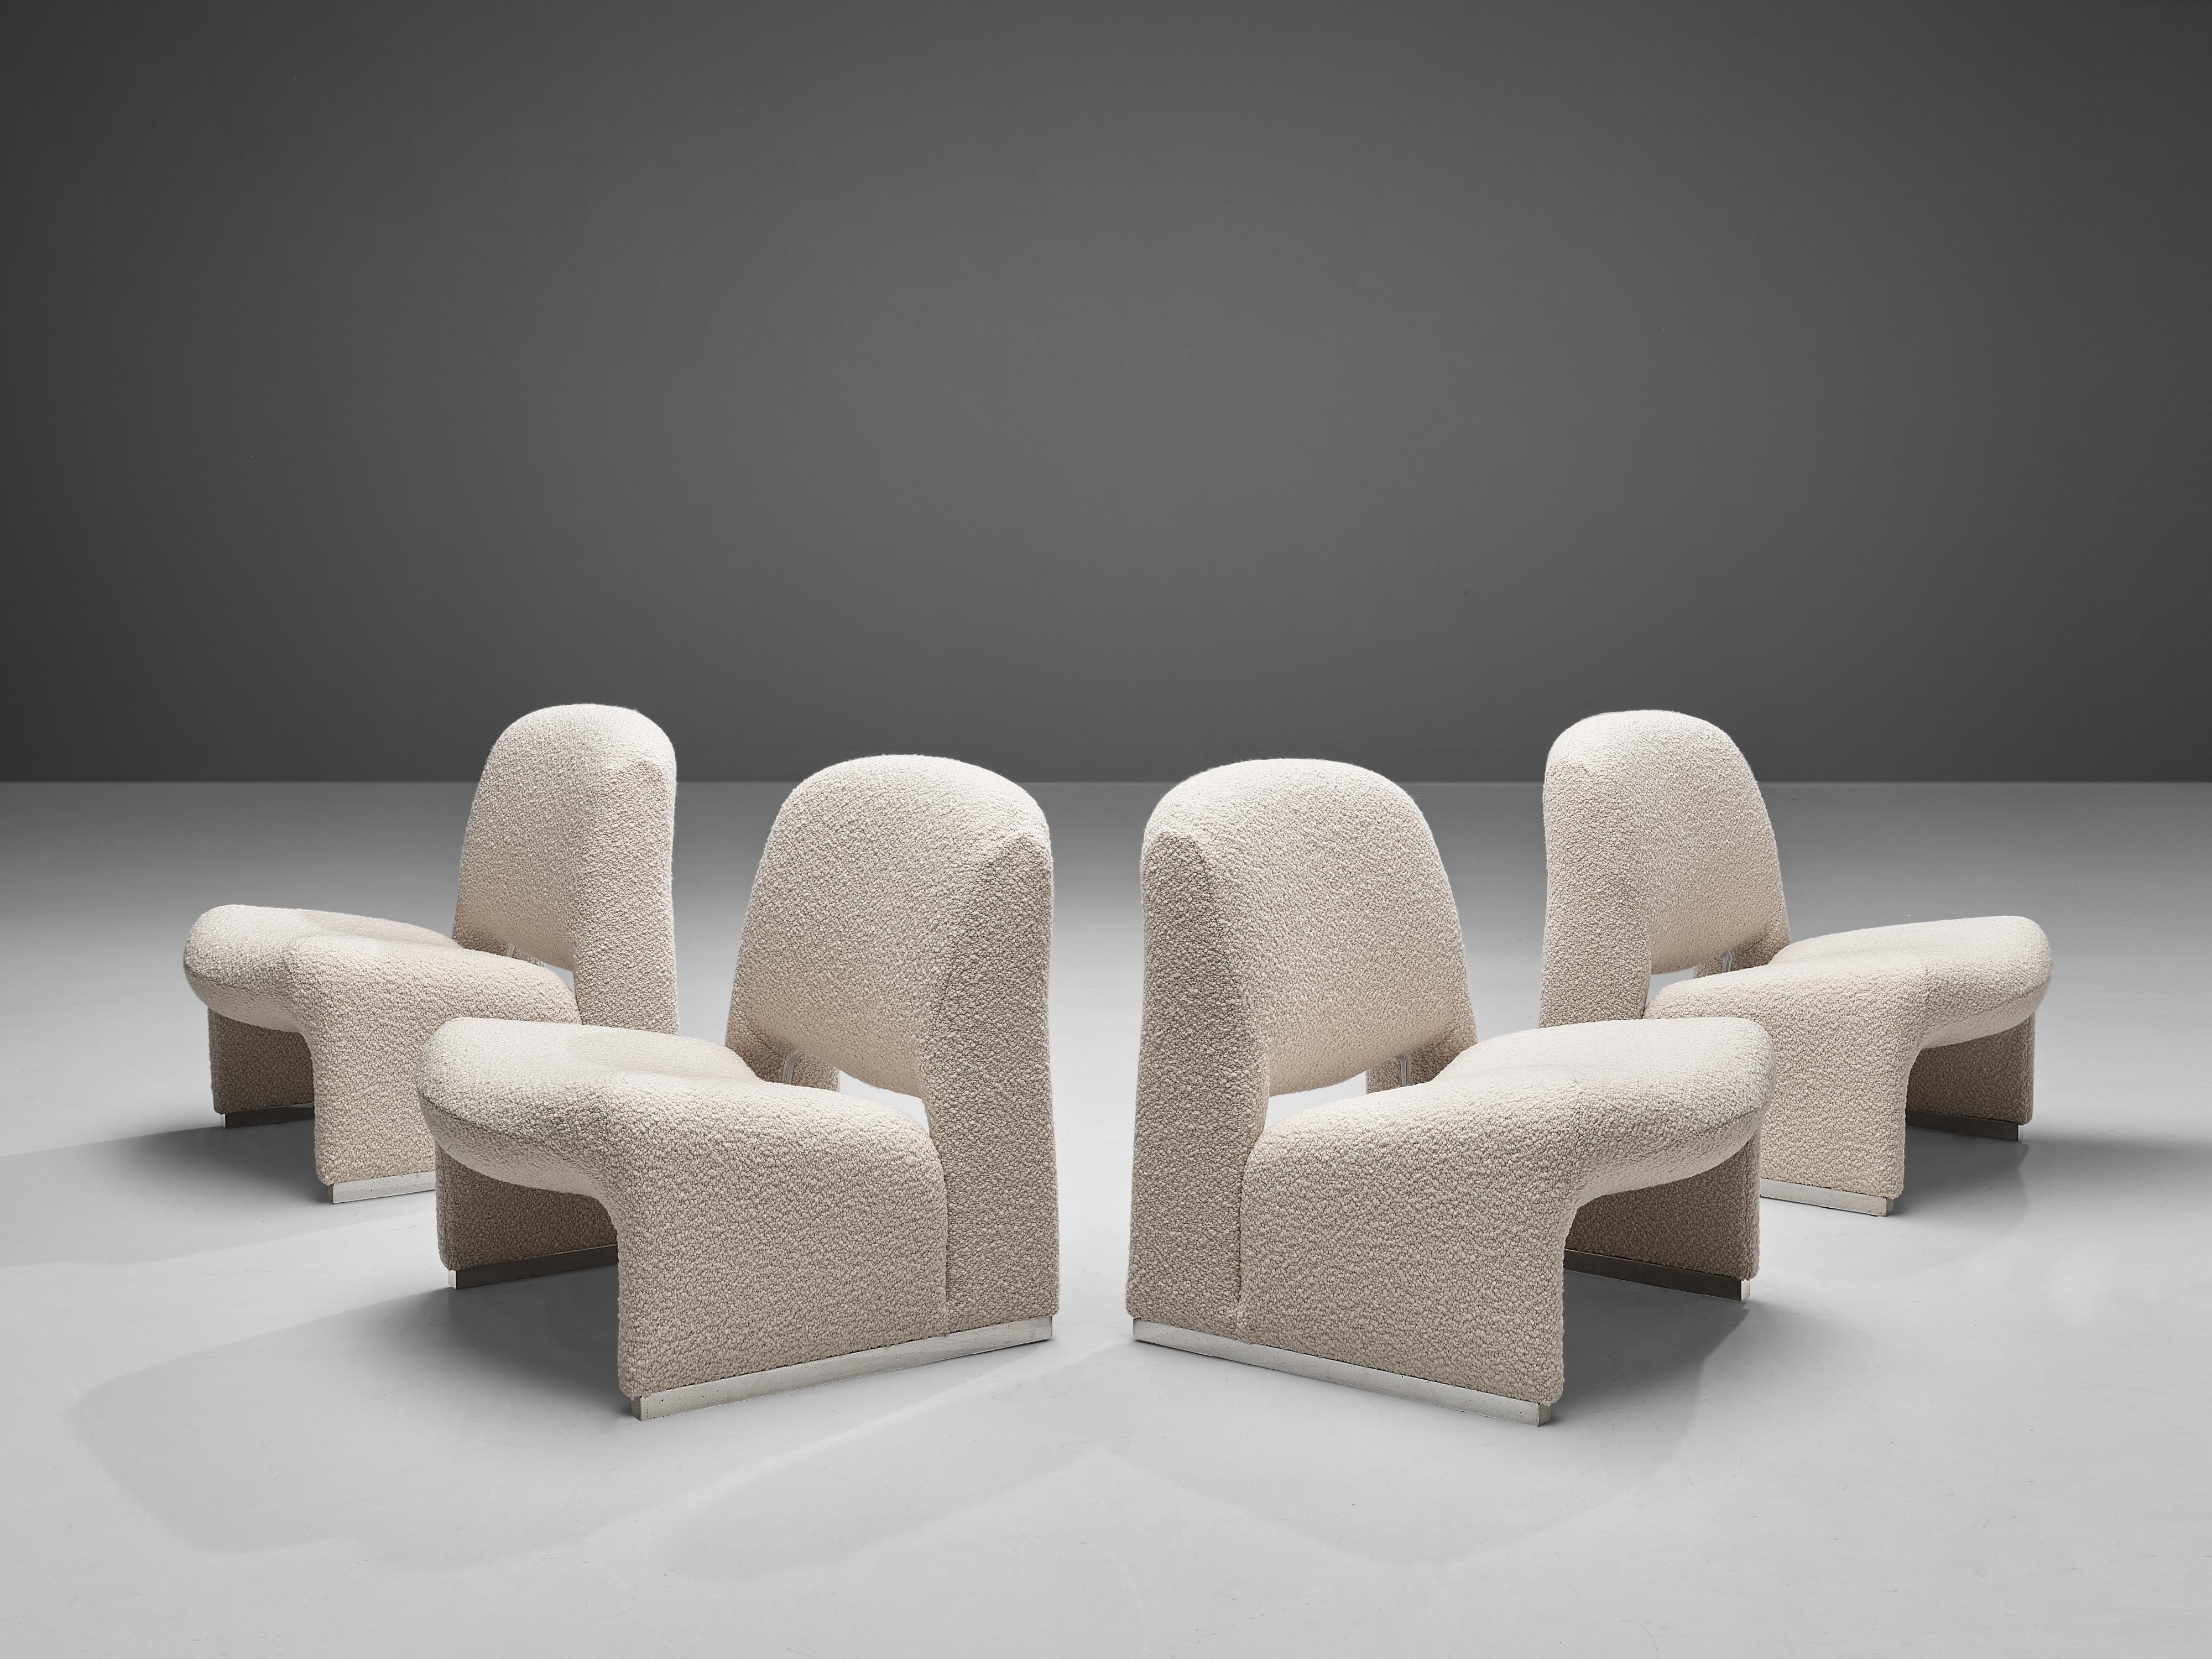 Lounge chairs, fabric, metal, Italy, 1970s

These lounge chairs strongly remind of Giancarlo Piretti’s ‘Alky’ lounge chair (1969), yet they feature characteristic differences. Whereas the ‘Alky’ lounge chair consists of one shell, these chairs have